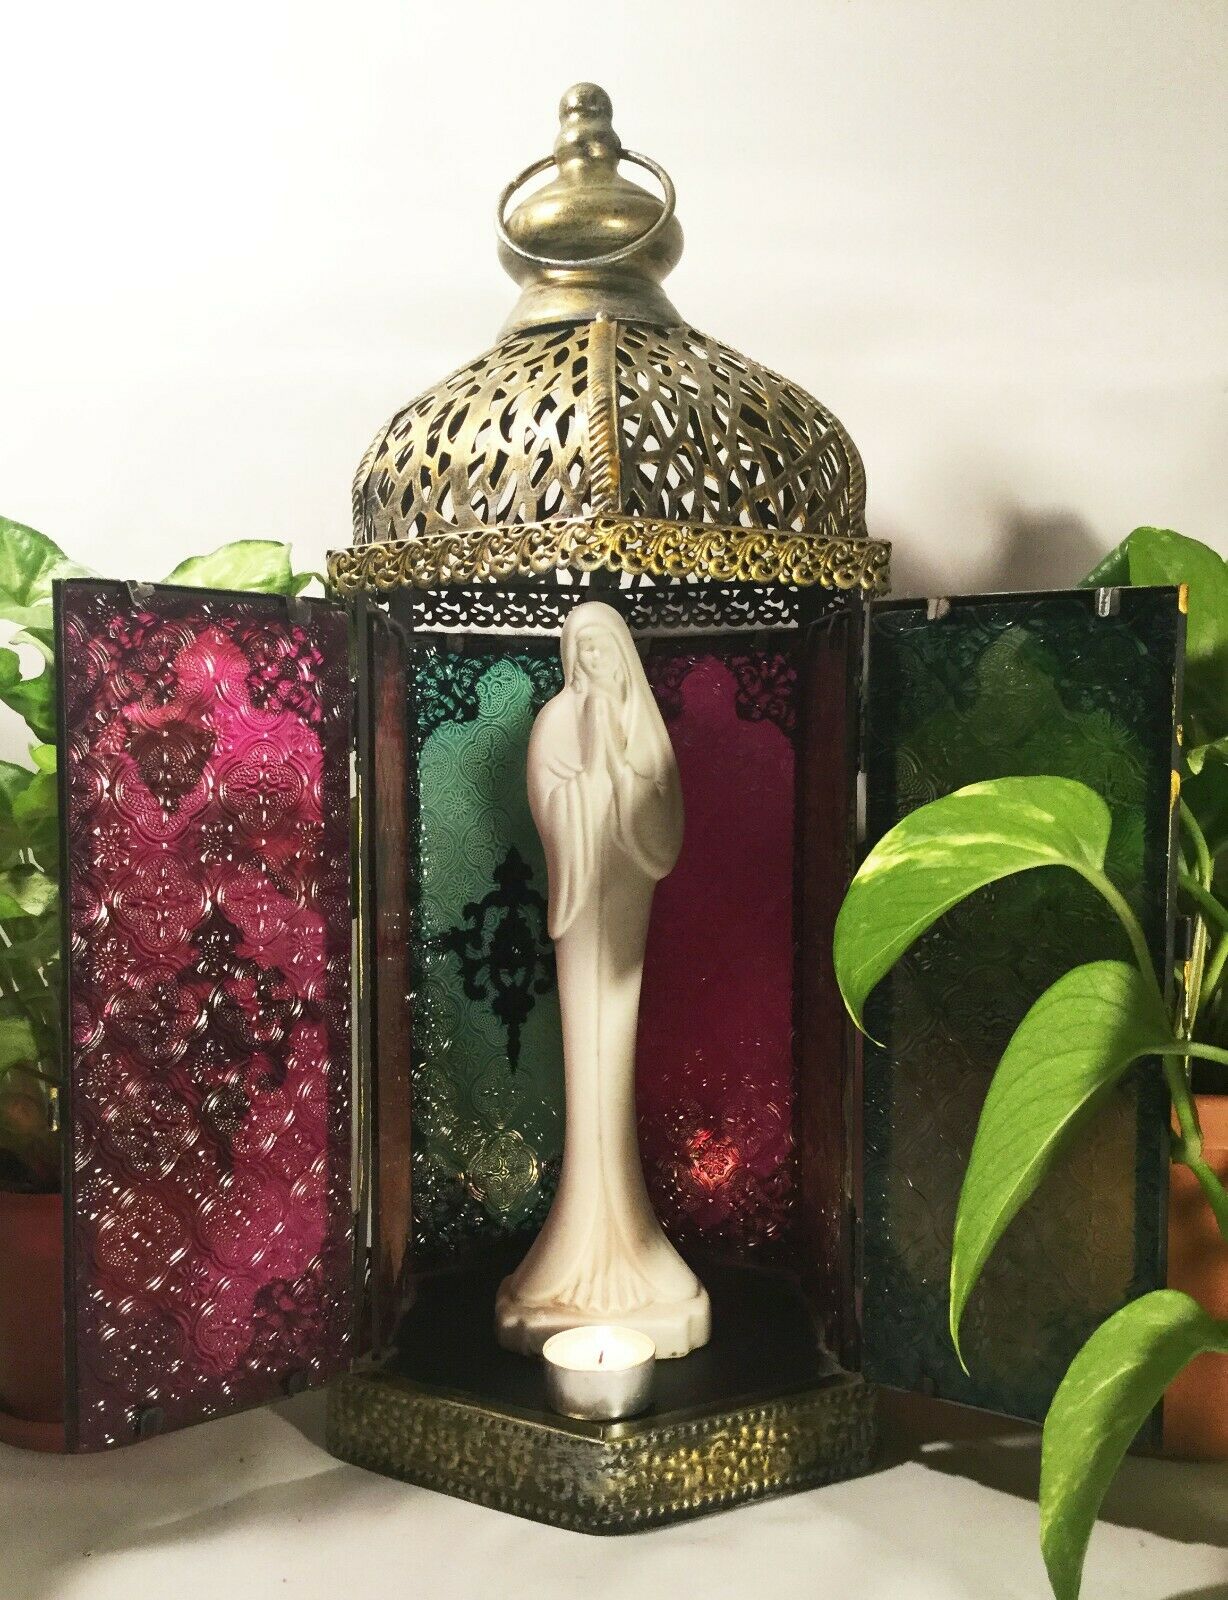 Moroccan Inspired Altar Shrine. Temple Hanging Lantern. For Madonna Or Candles.